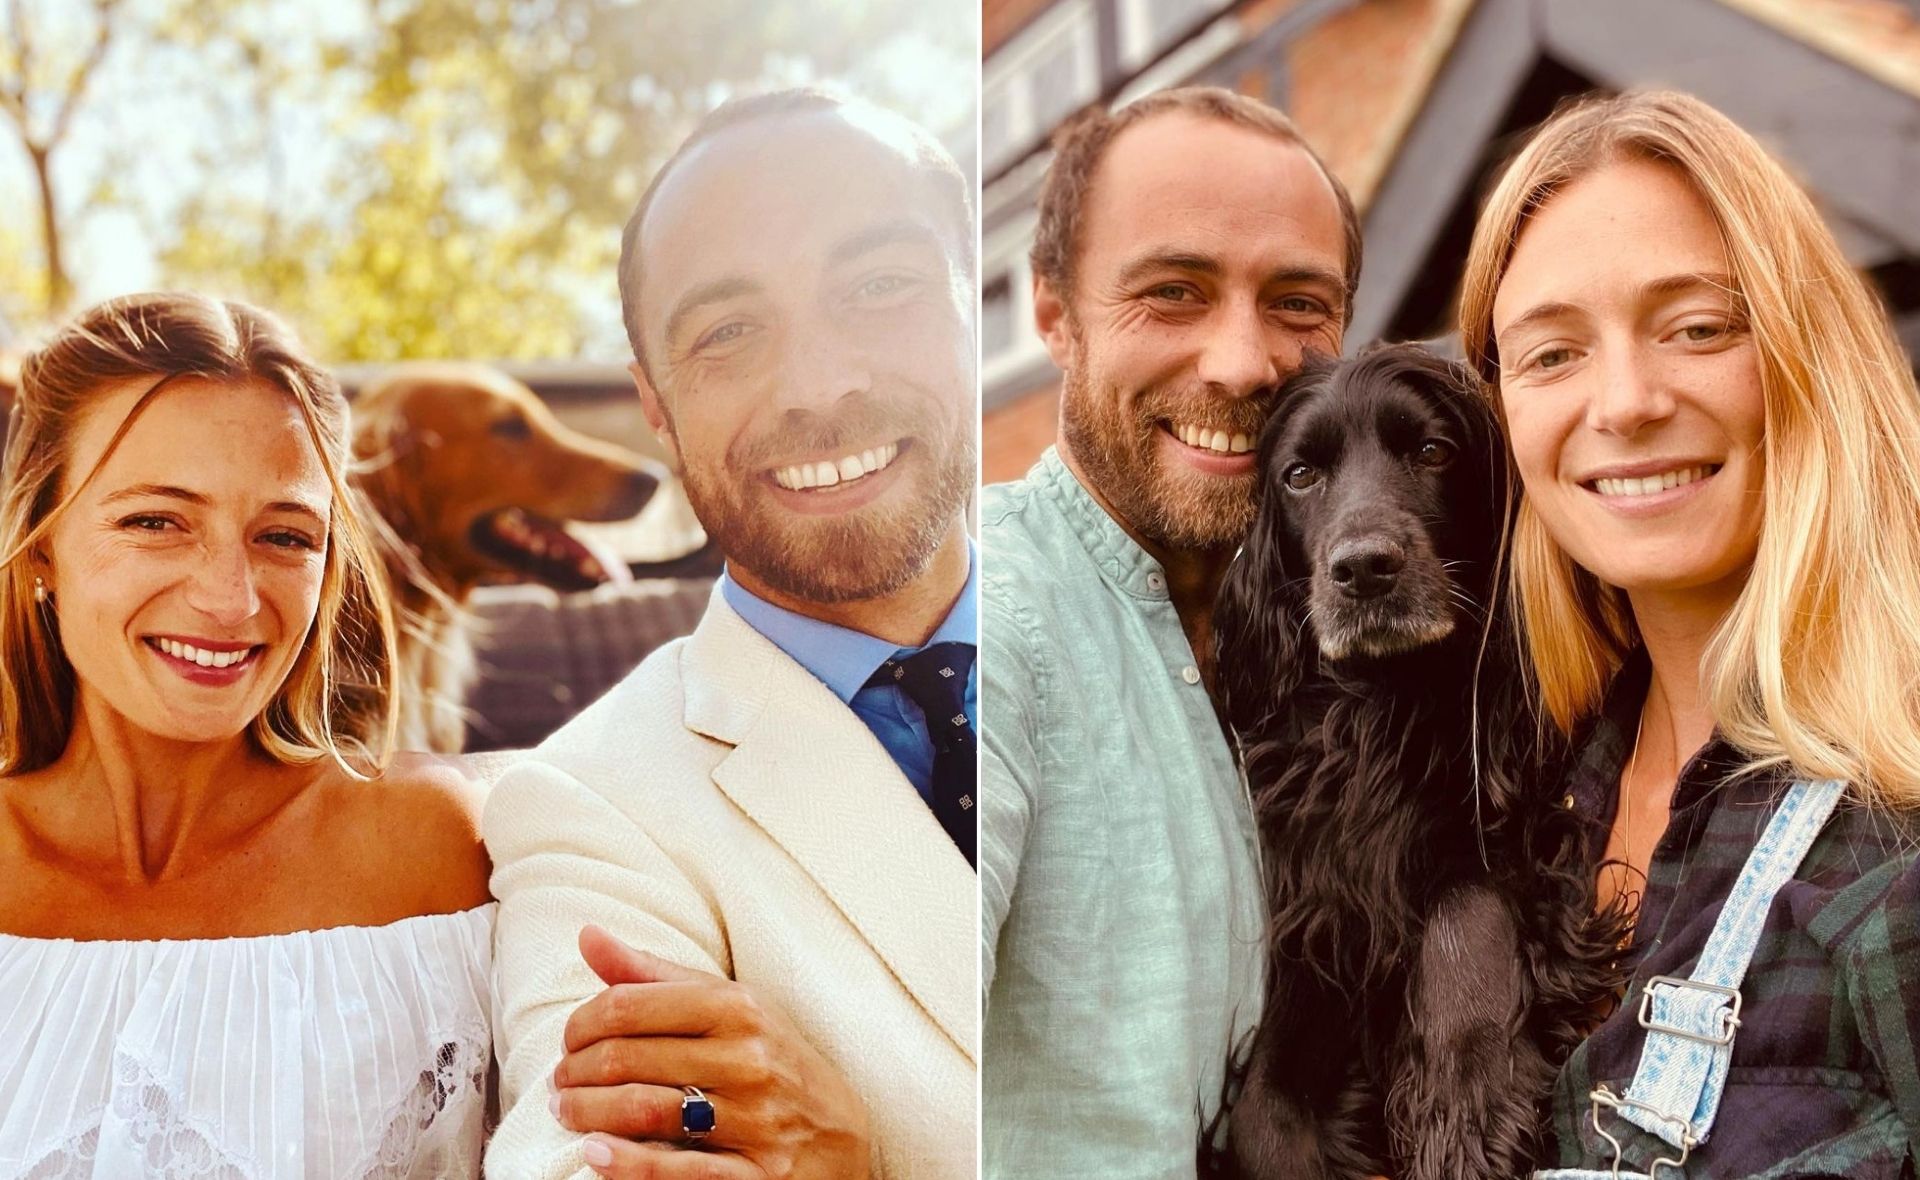 James Middleton returns to social media after a two month break and reflects on his first few months of marriage